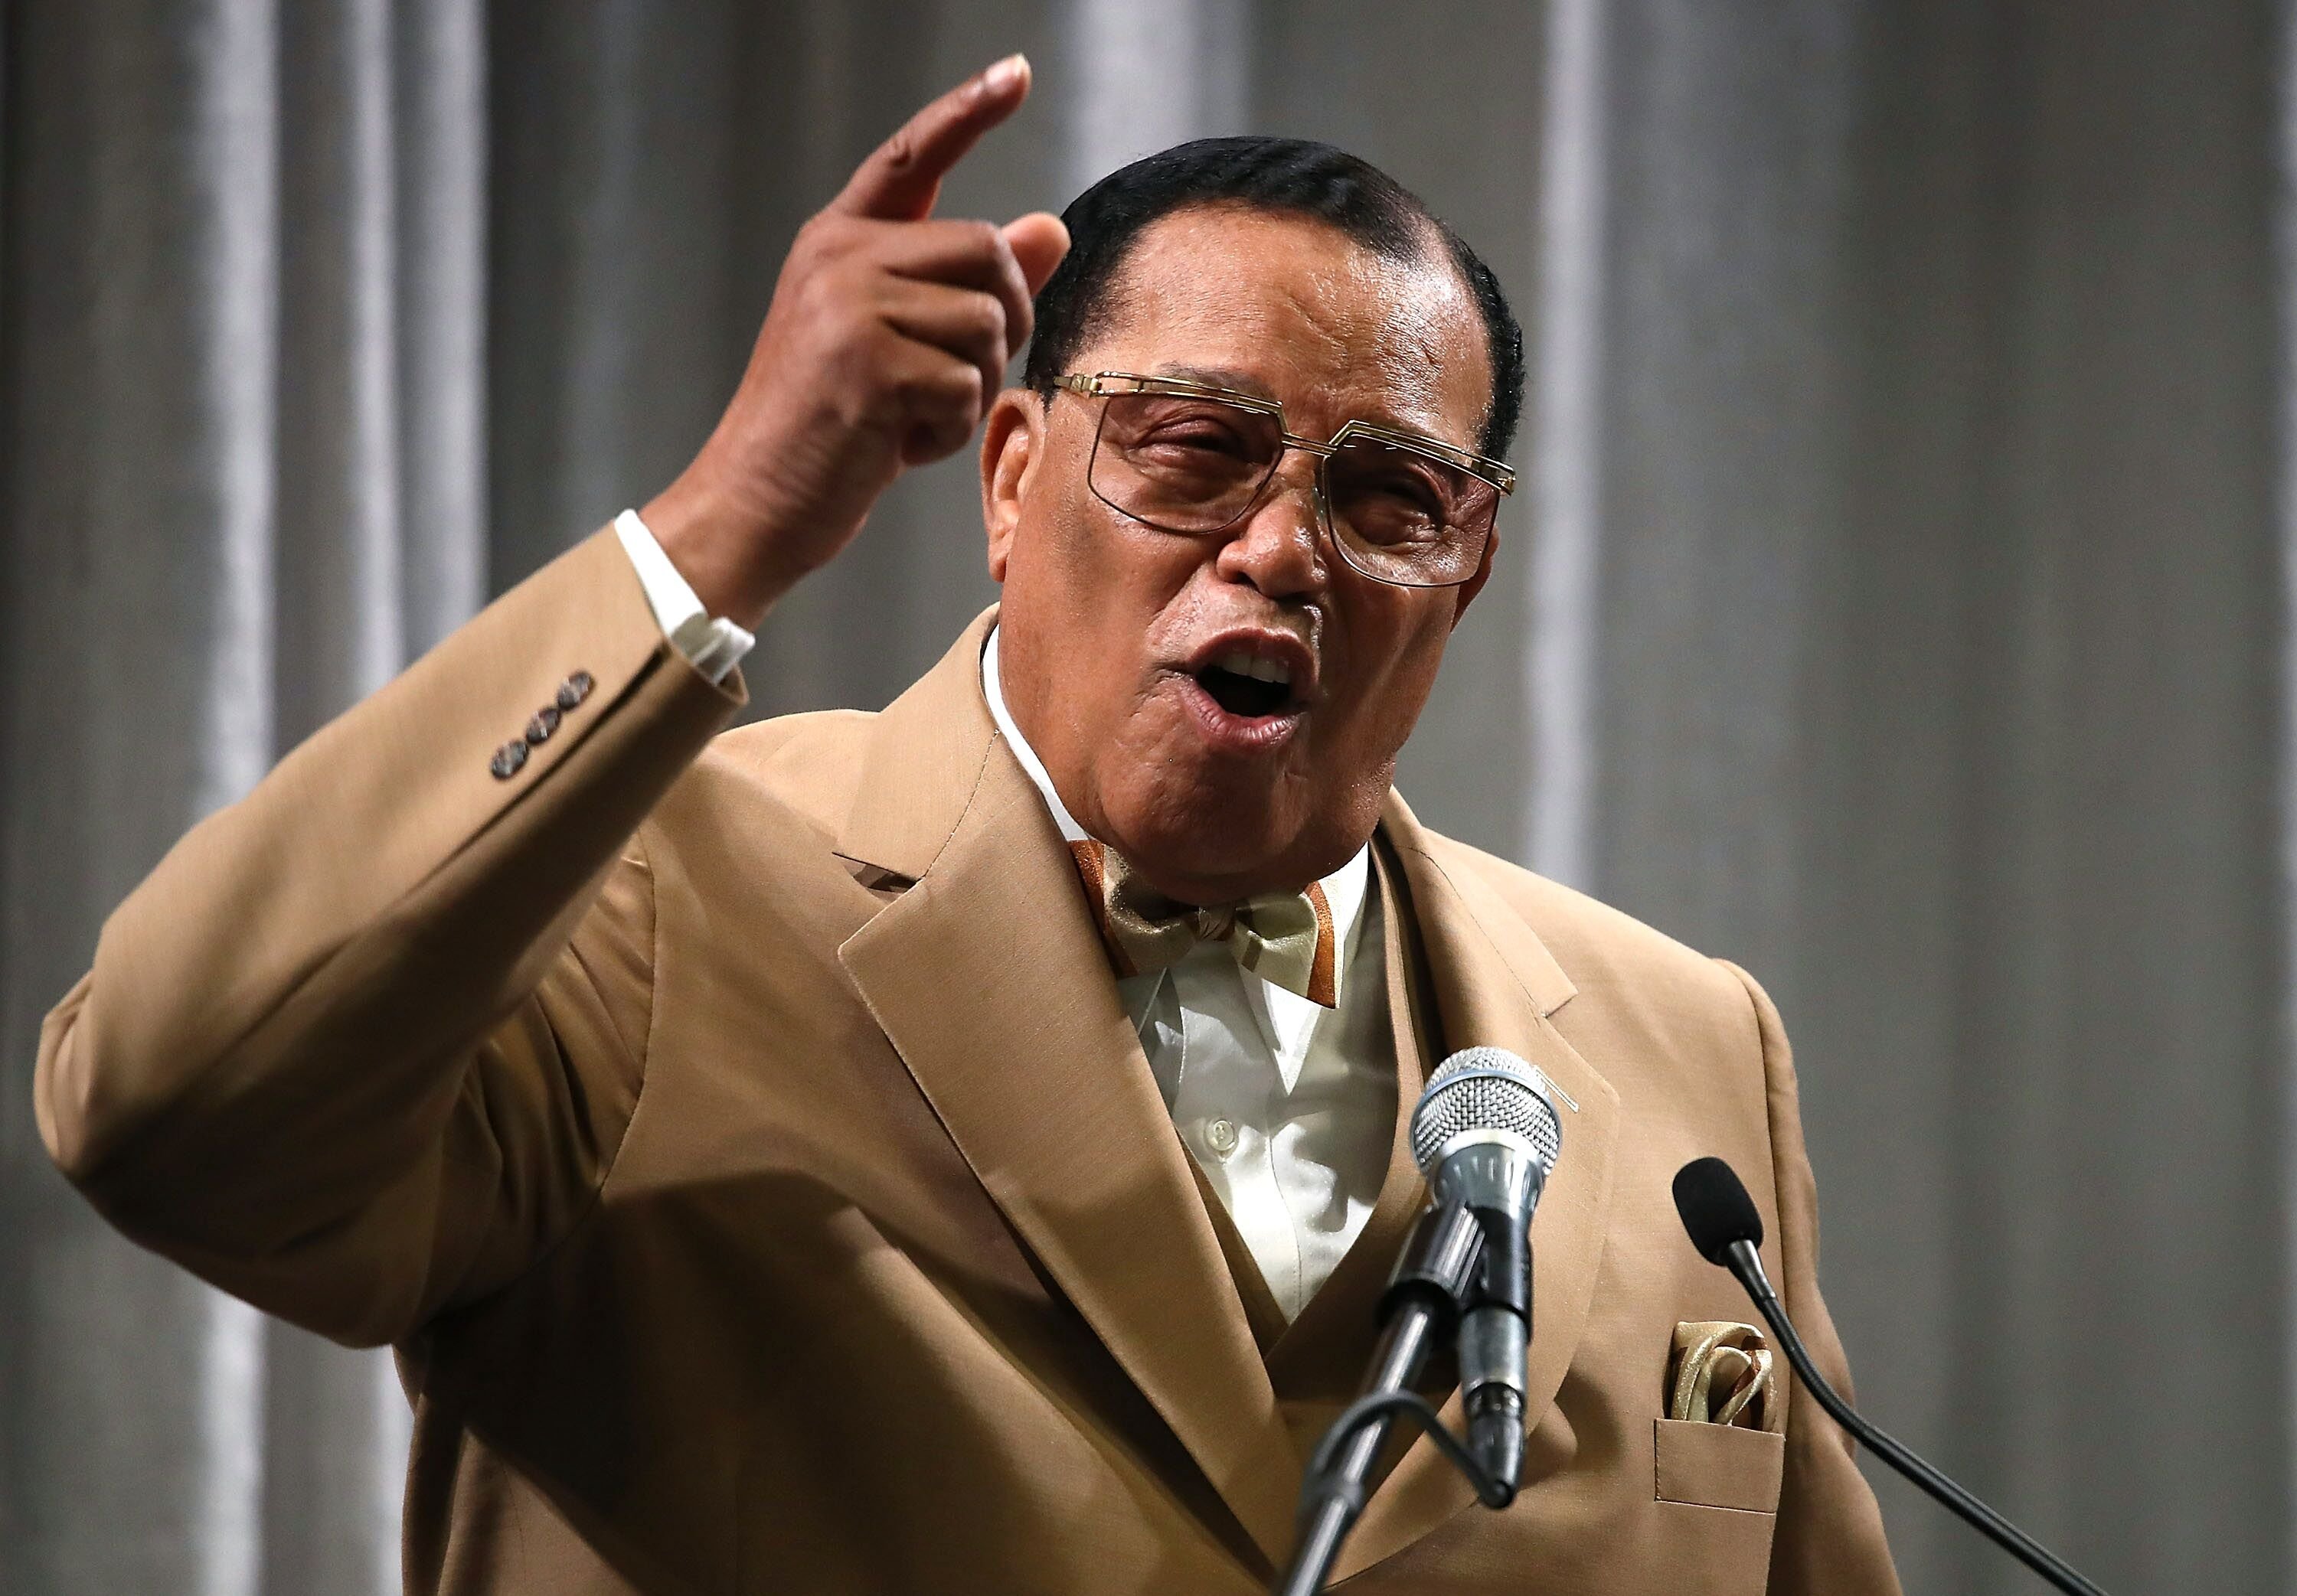 Nation of Islam Minister Louis Farrakhan delivers a speech at the Watergate Hotel, on November 16, 2017 in Washington, DC. | Photo: Getty Images